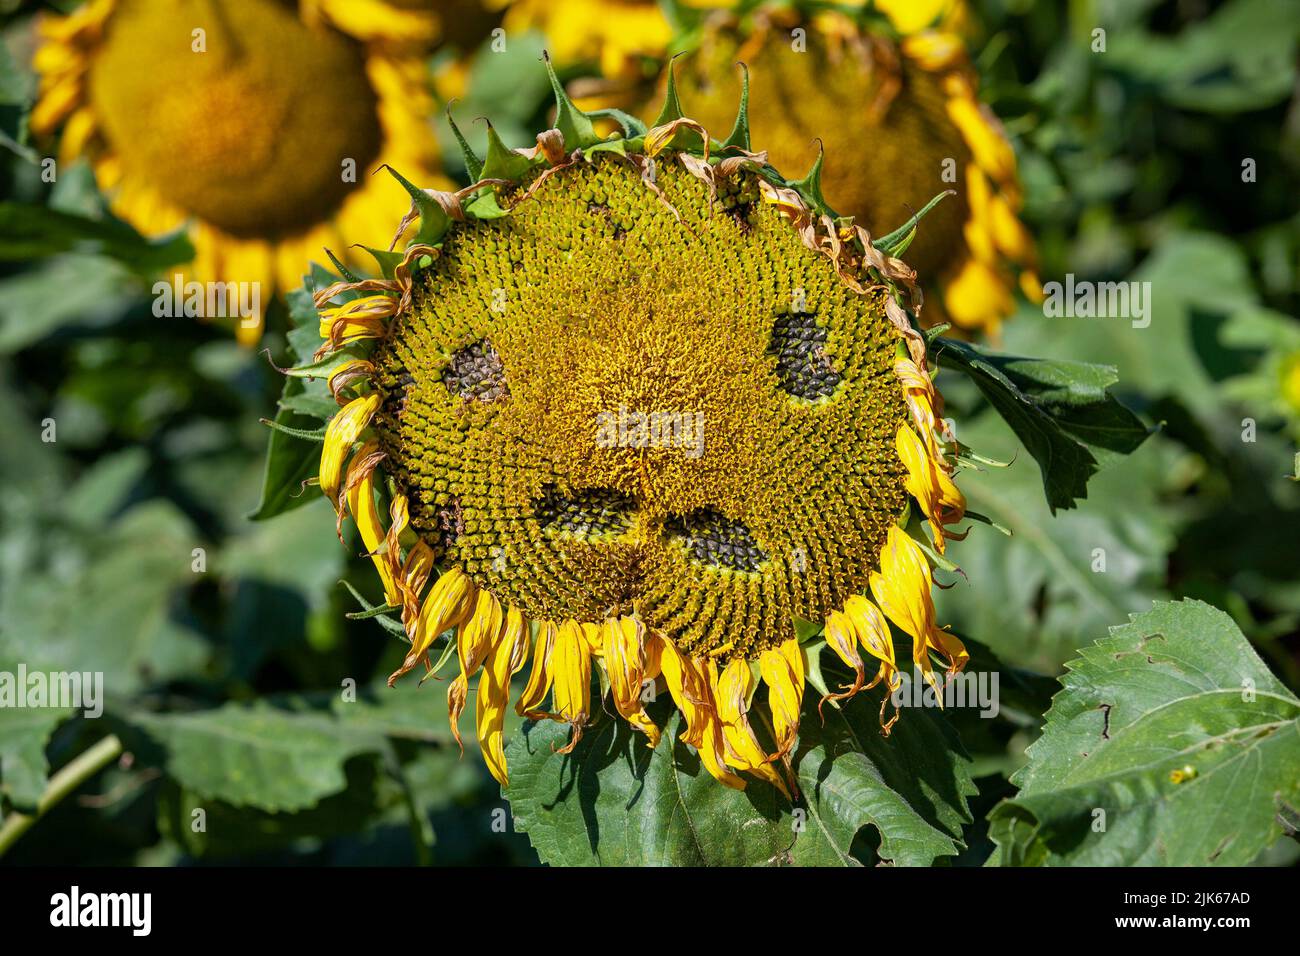 a field with sunflowers during cultivation to harvest sunflower seeds ...